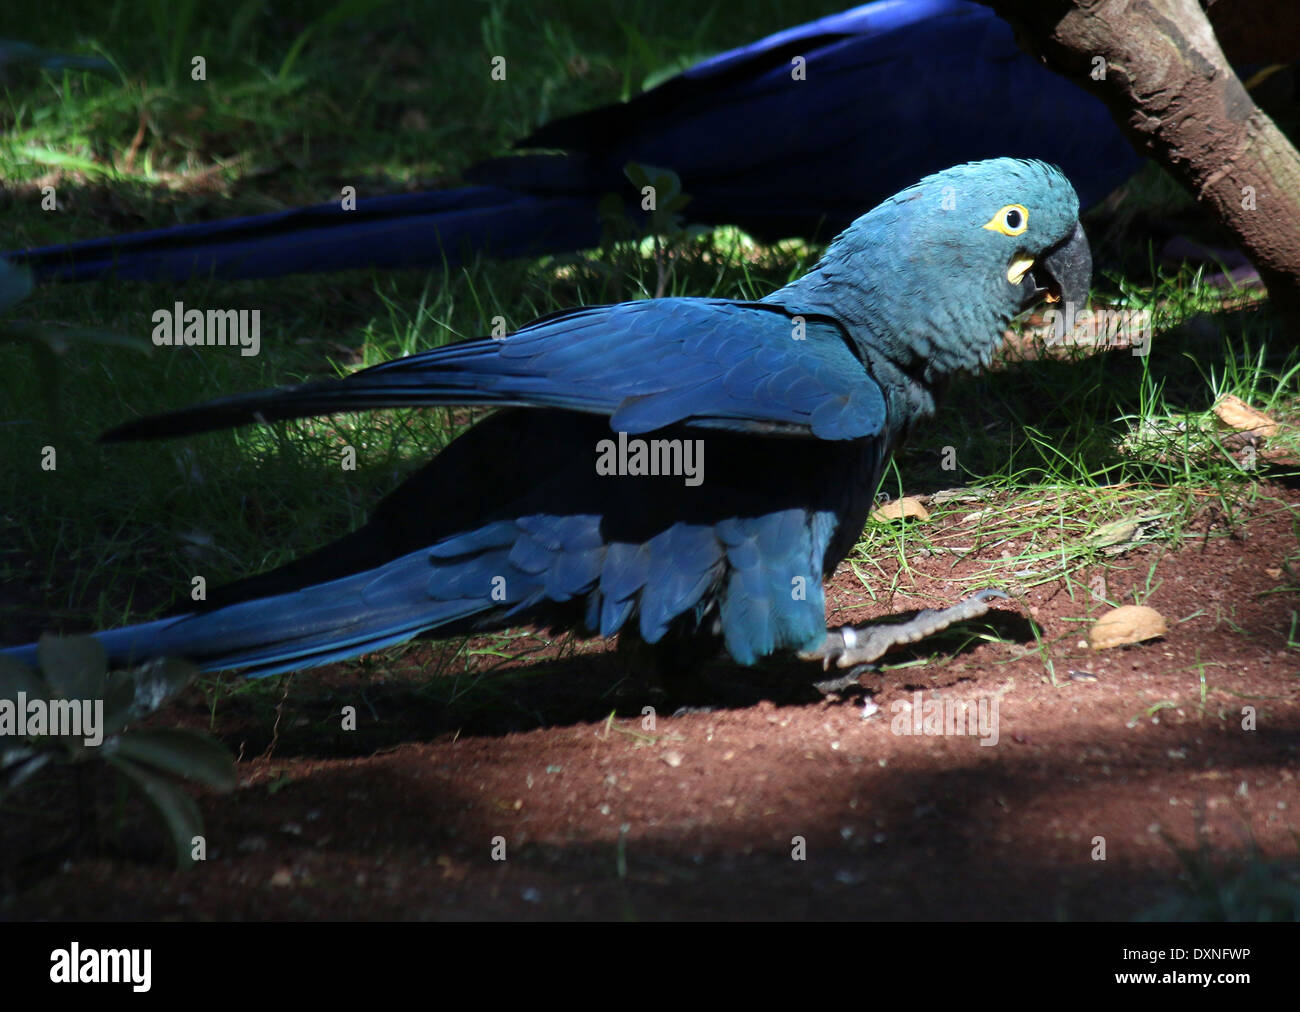 South American Hyacinth Macaw (Anodorhynchus hyacinthinus). Largest parrot species in the world, found in Brazil, Bolivia and Paraguay. Stock Photo